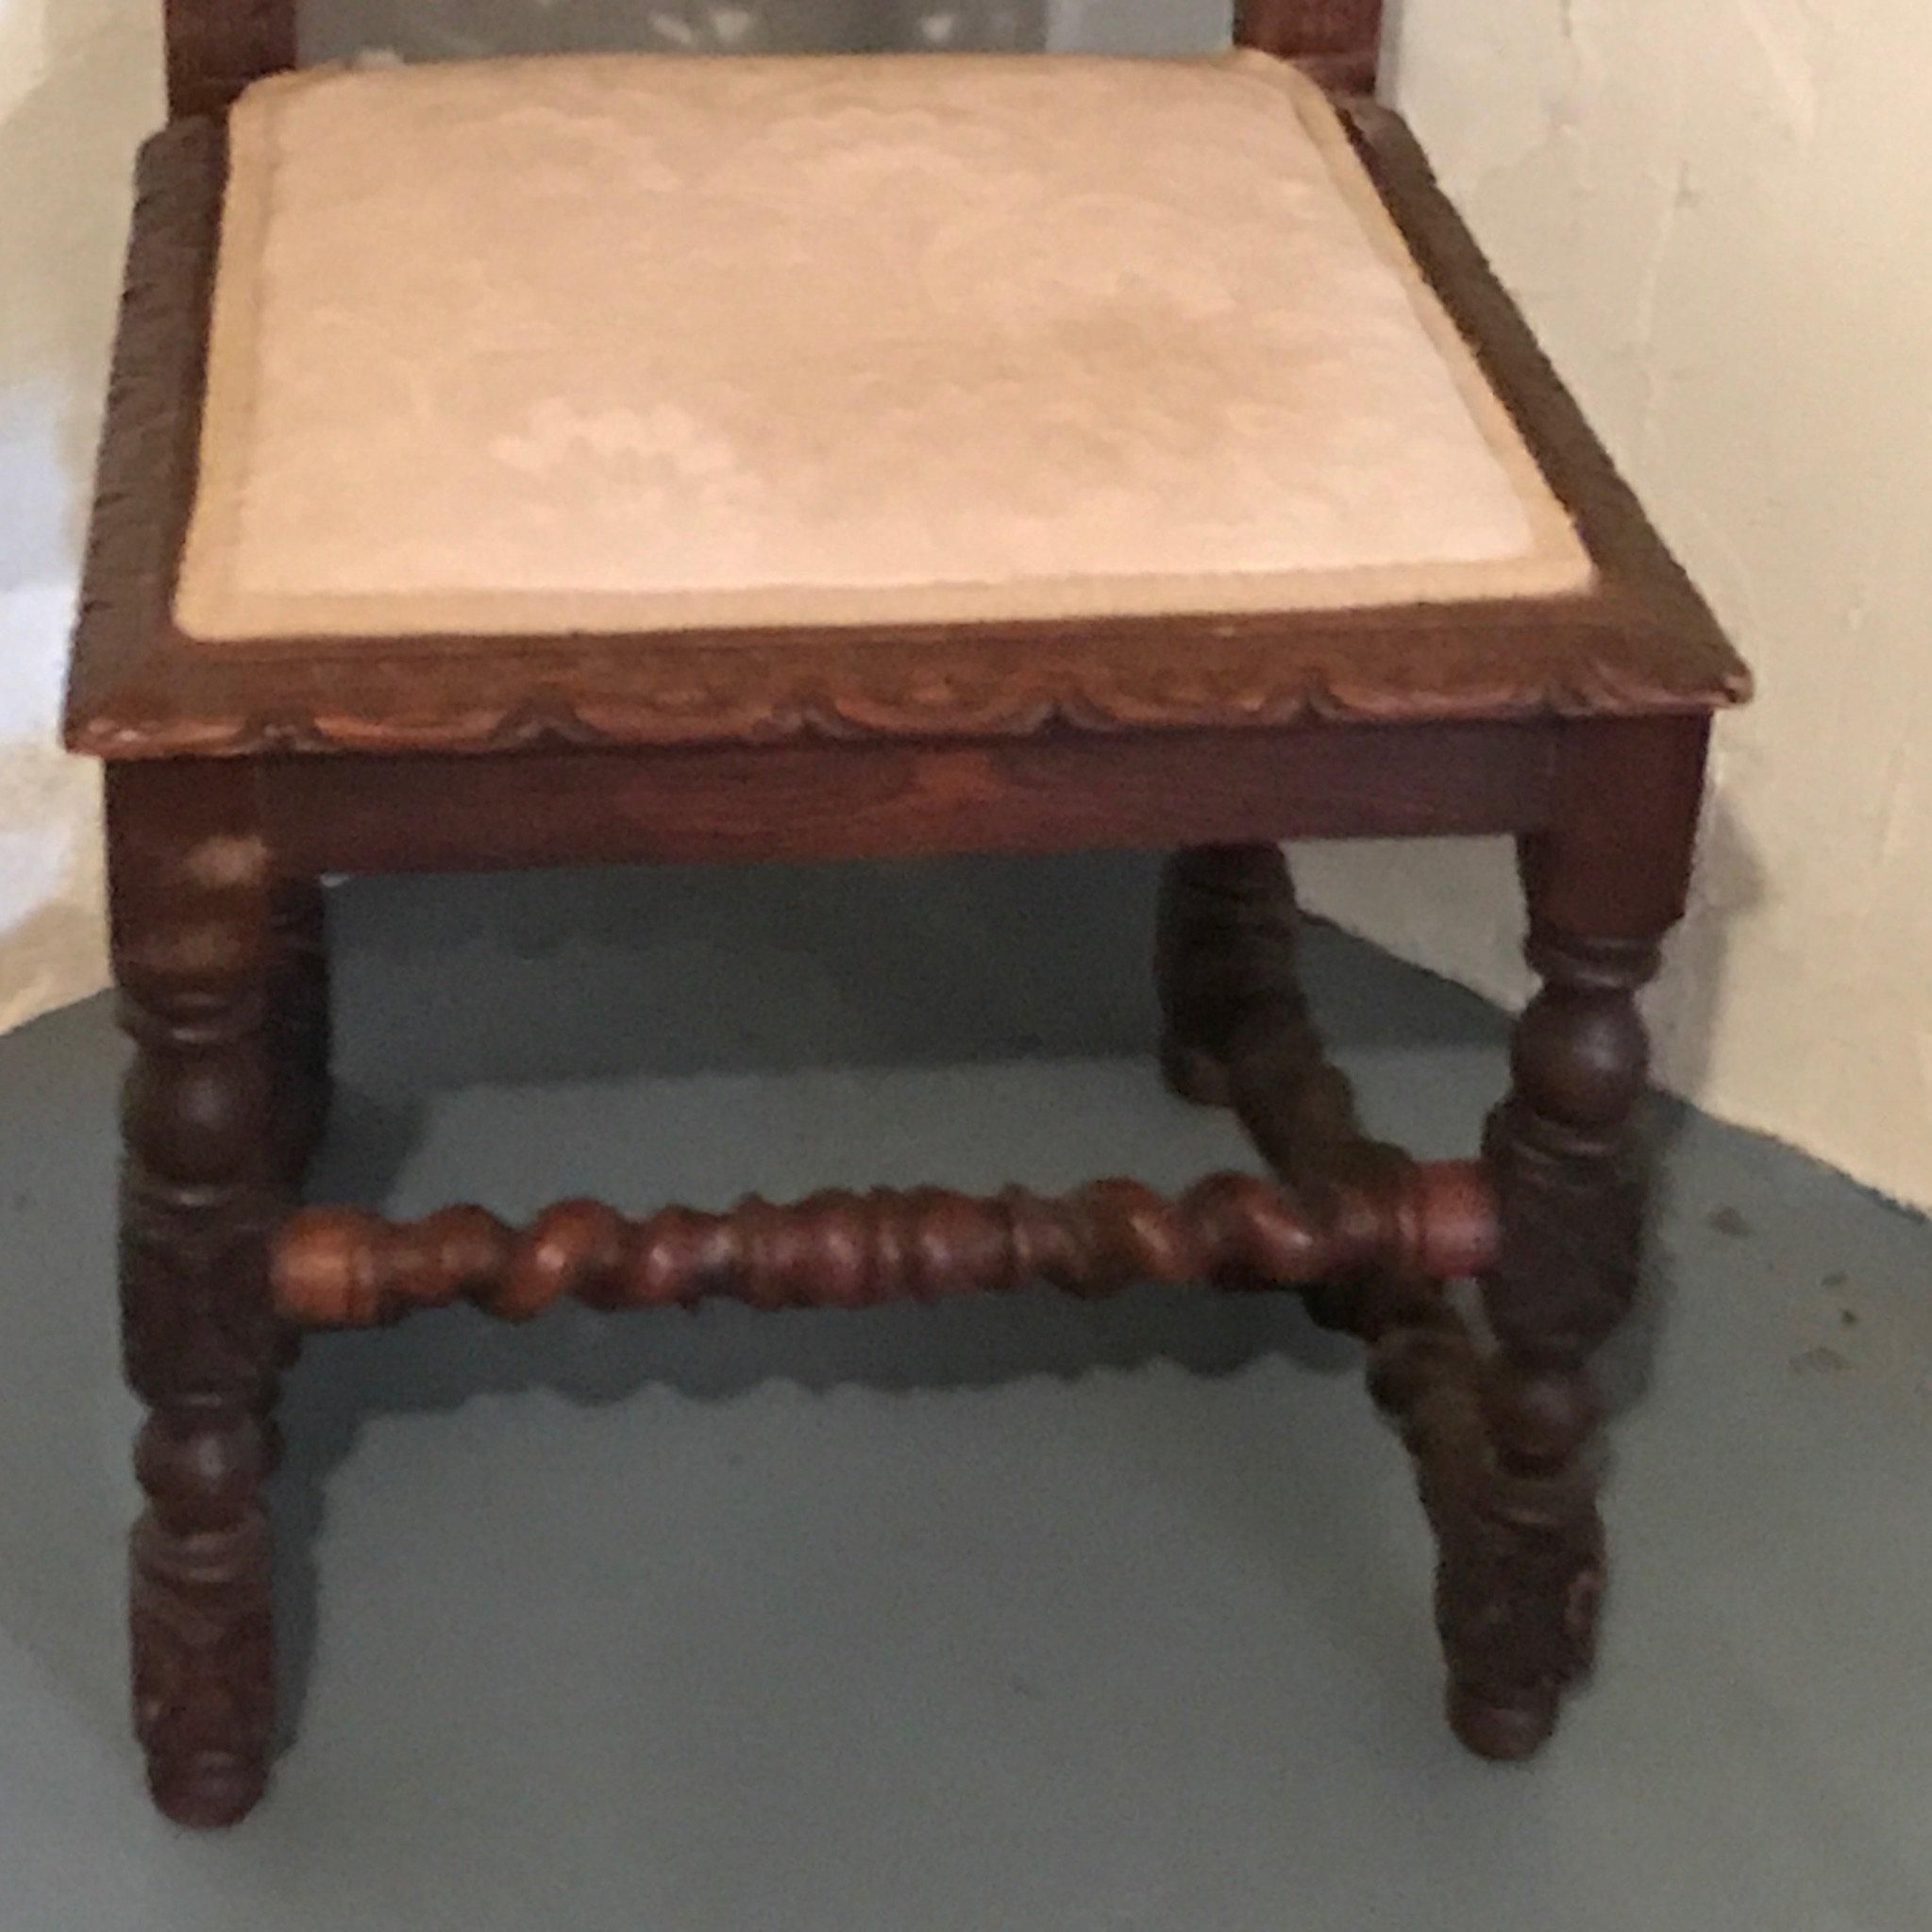 Antique Walnut Ornately Hand Carved Old Man Winter Chair w/Turned Legs - Amazing!